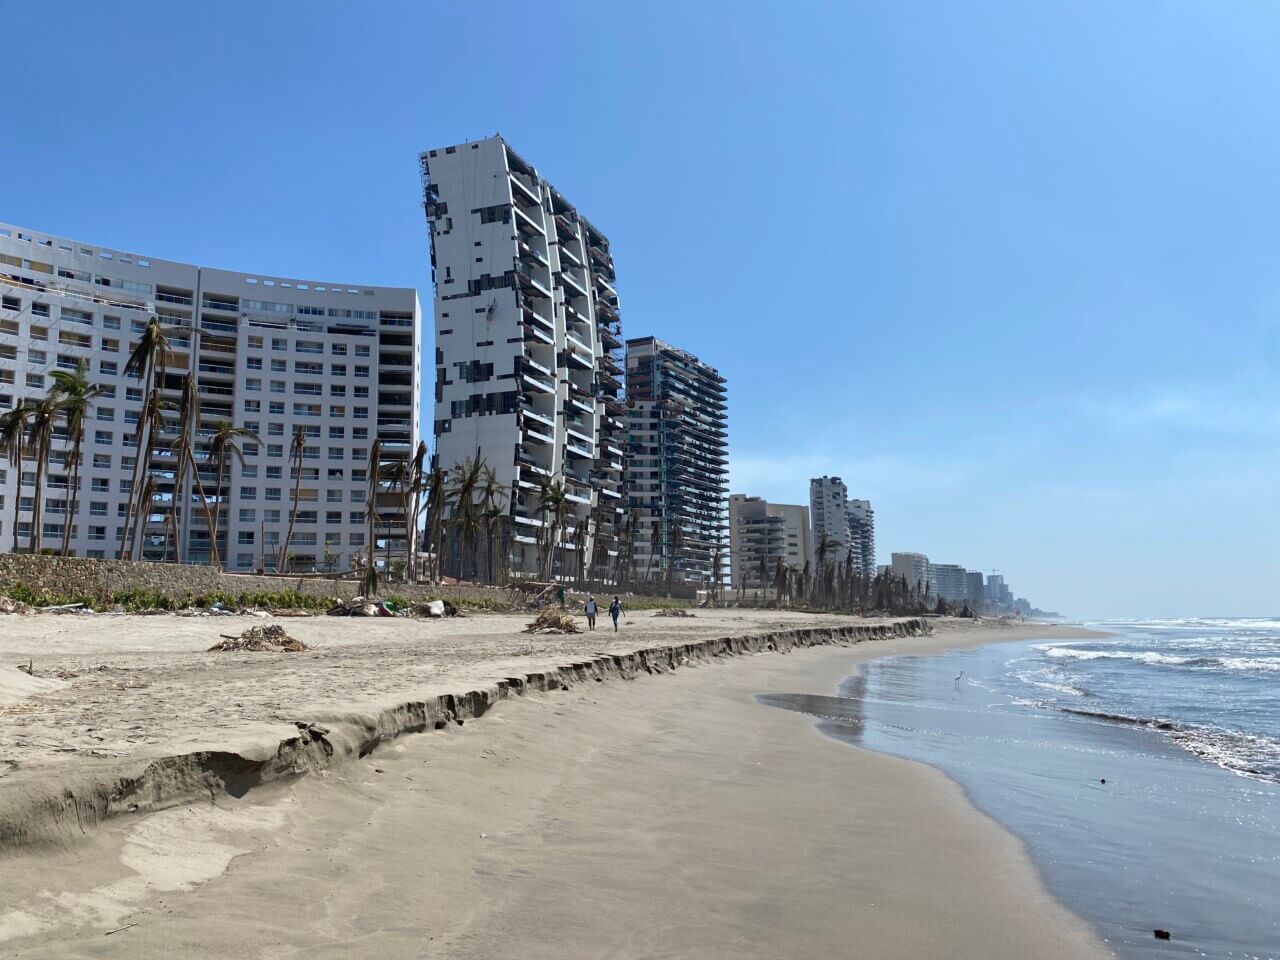 Image of beach shore with tall buildings damaged after a hurricane.